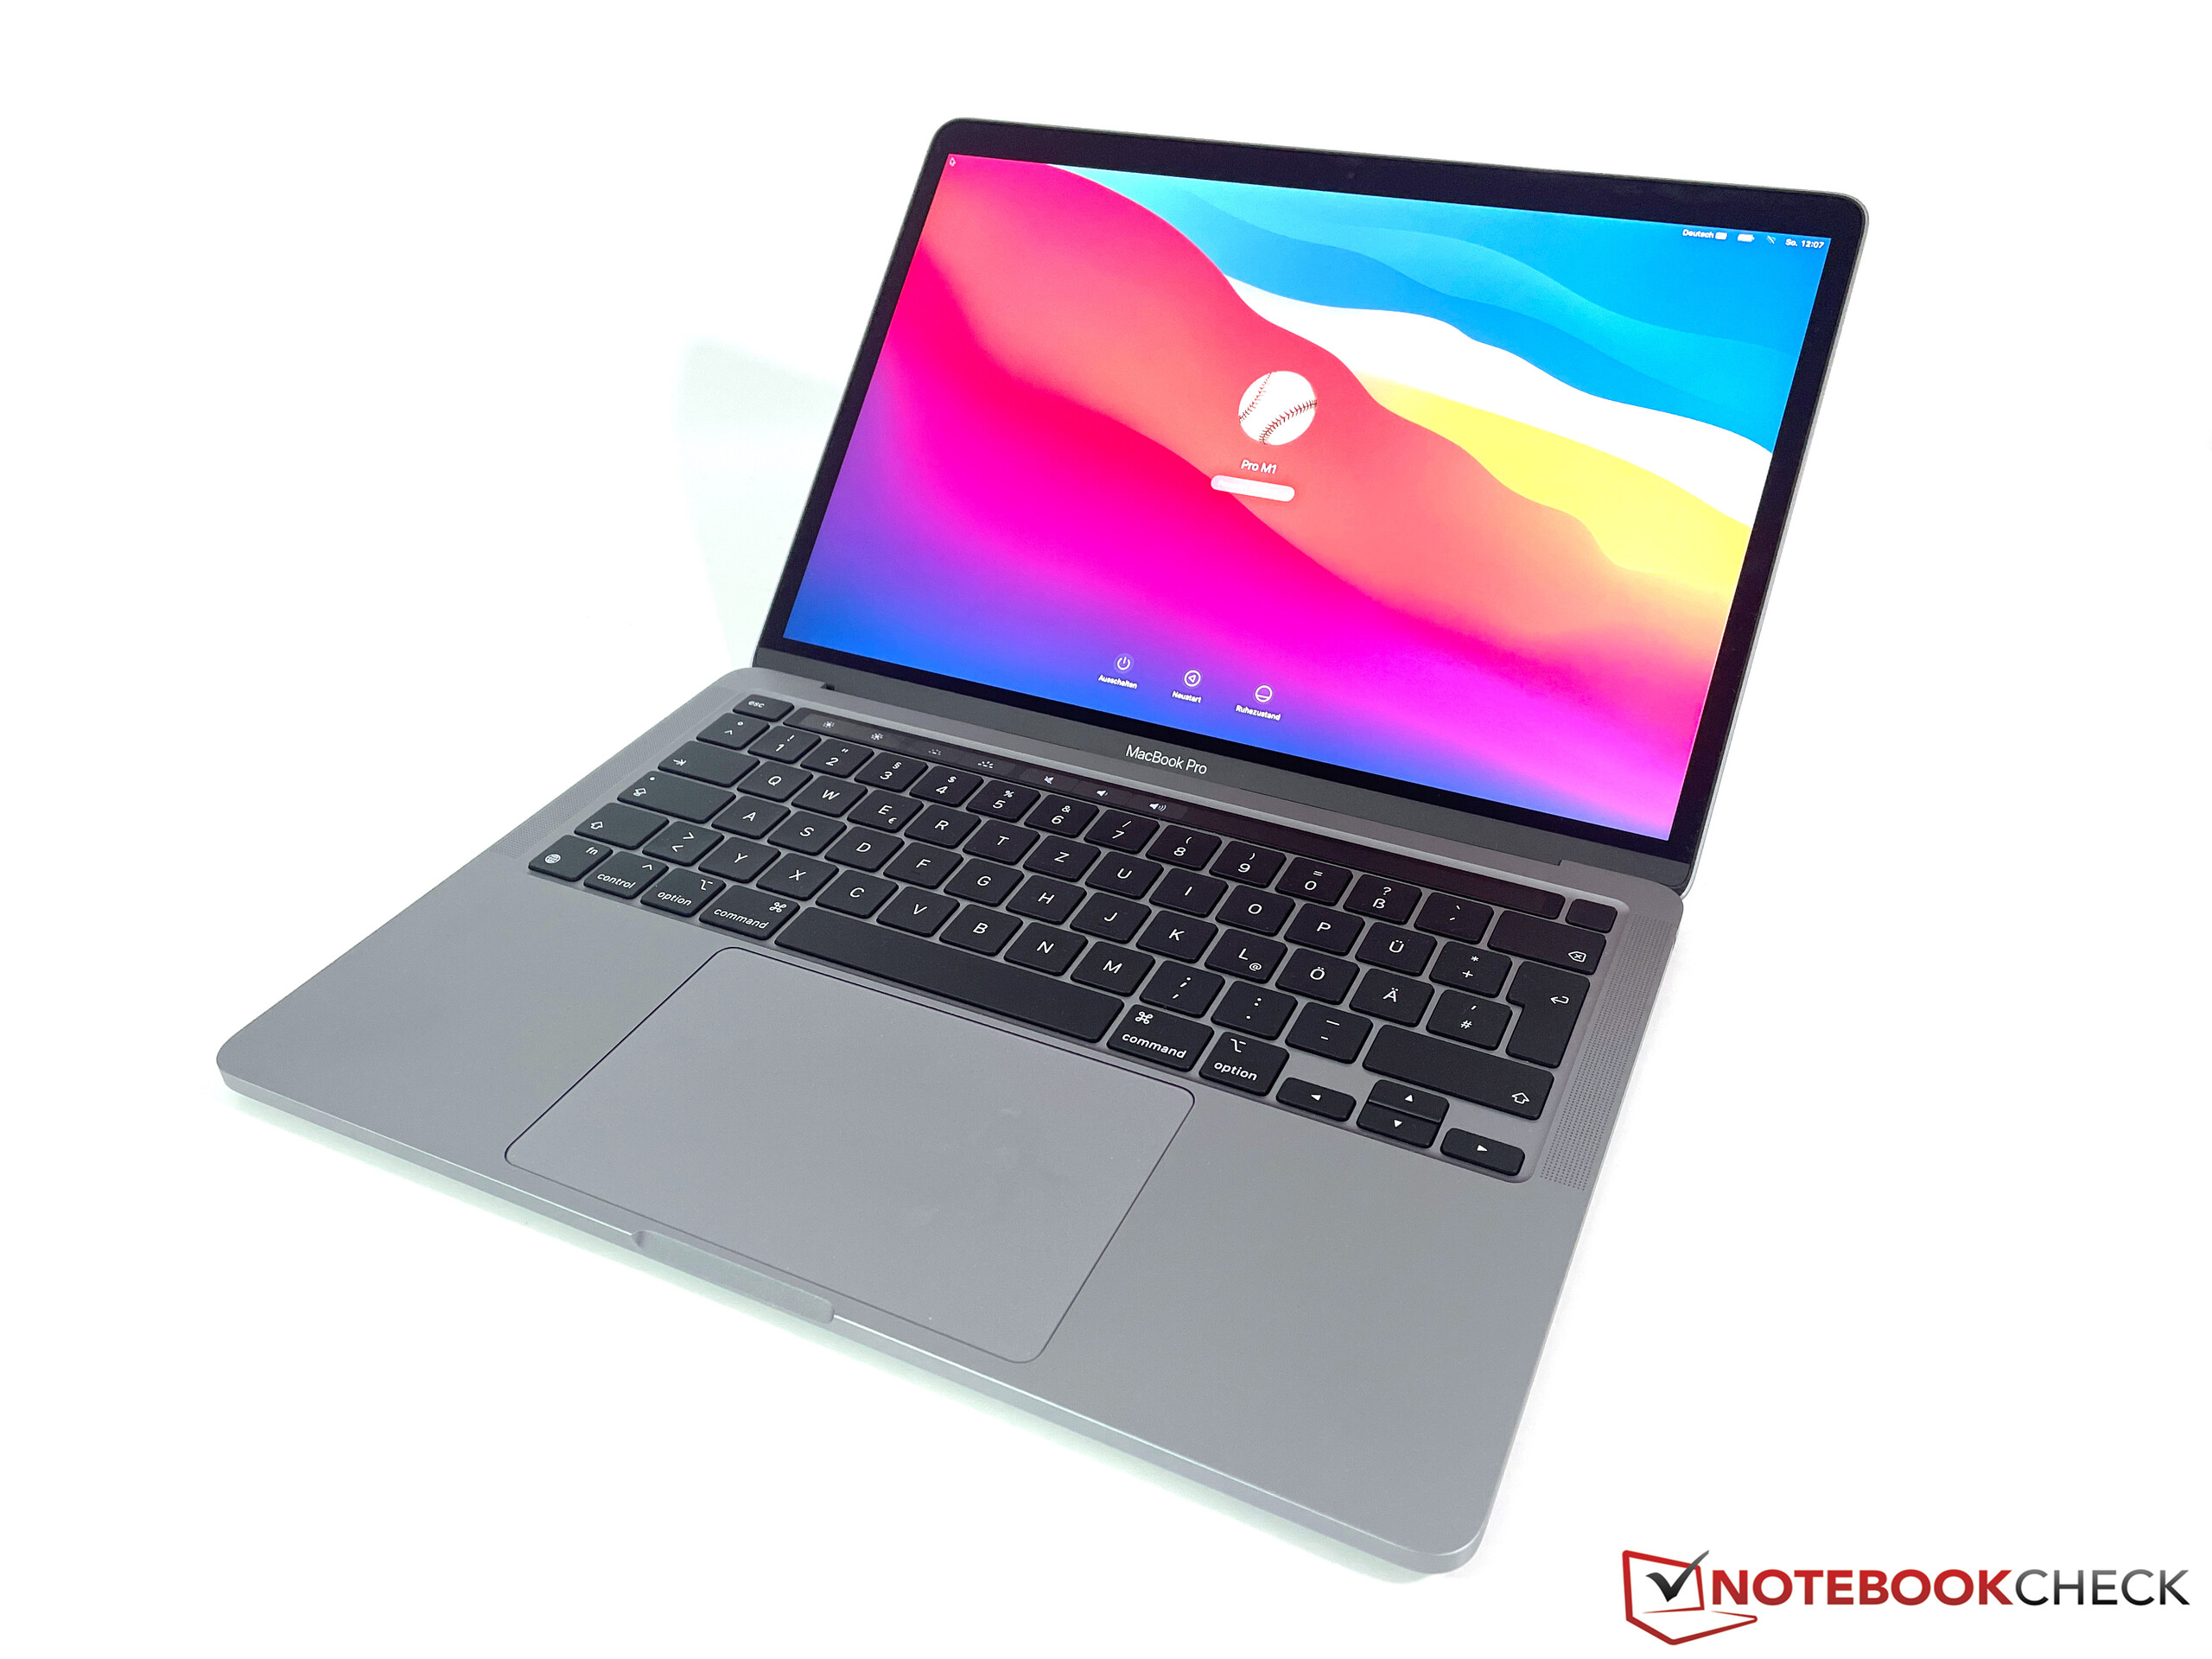 Apple MacBook Pro 13 Reviews performance gets boost 2020 The M1 NotebookCheck.net Review: also Laptop the - Pro entry-level